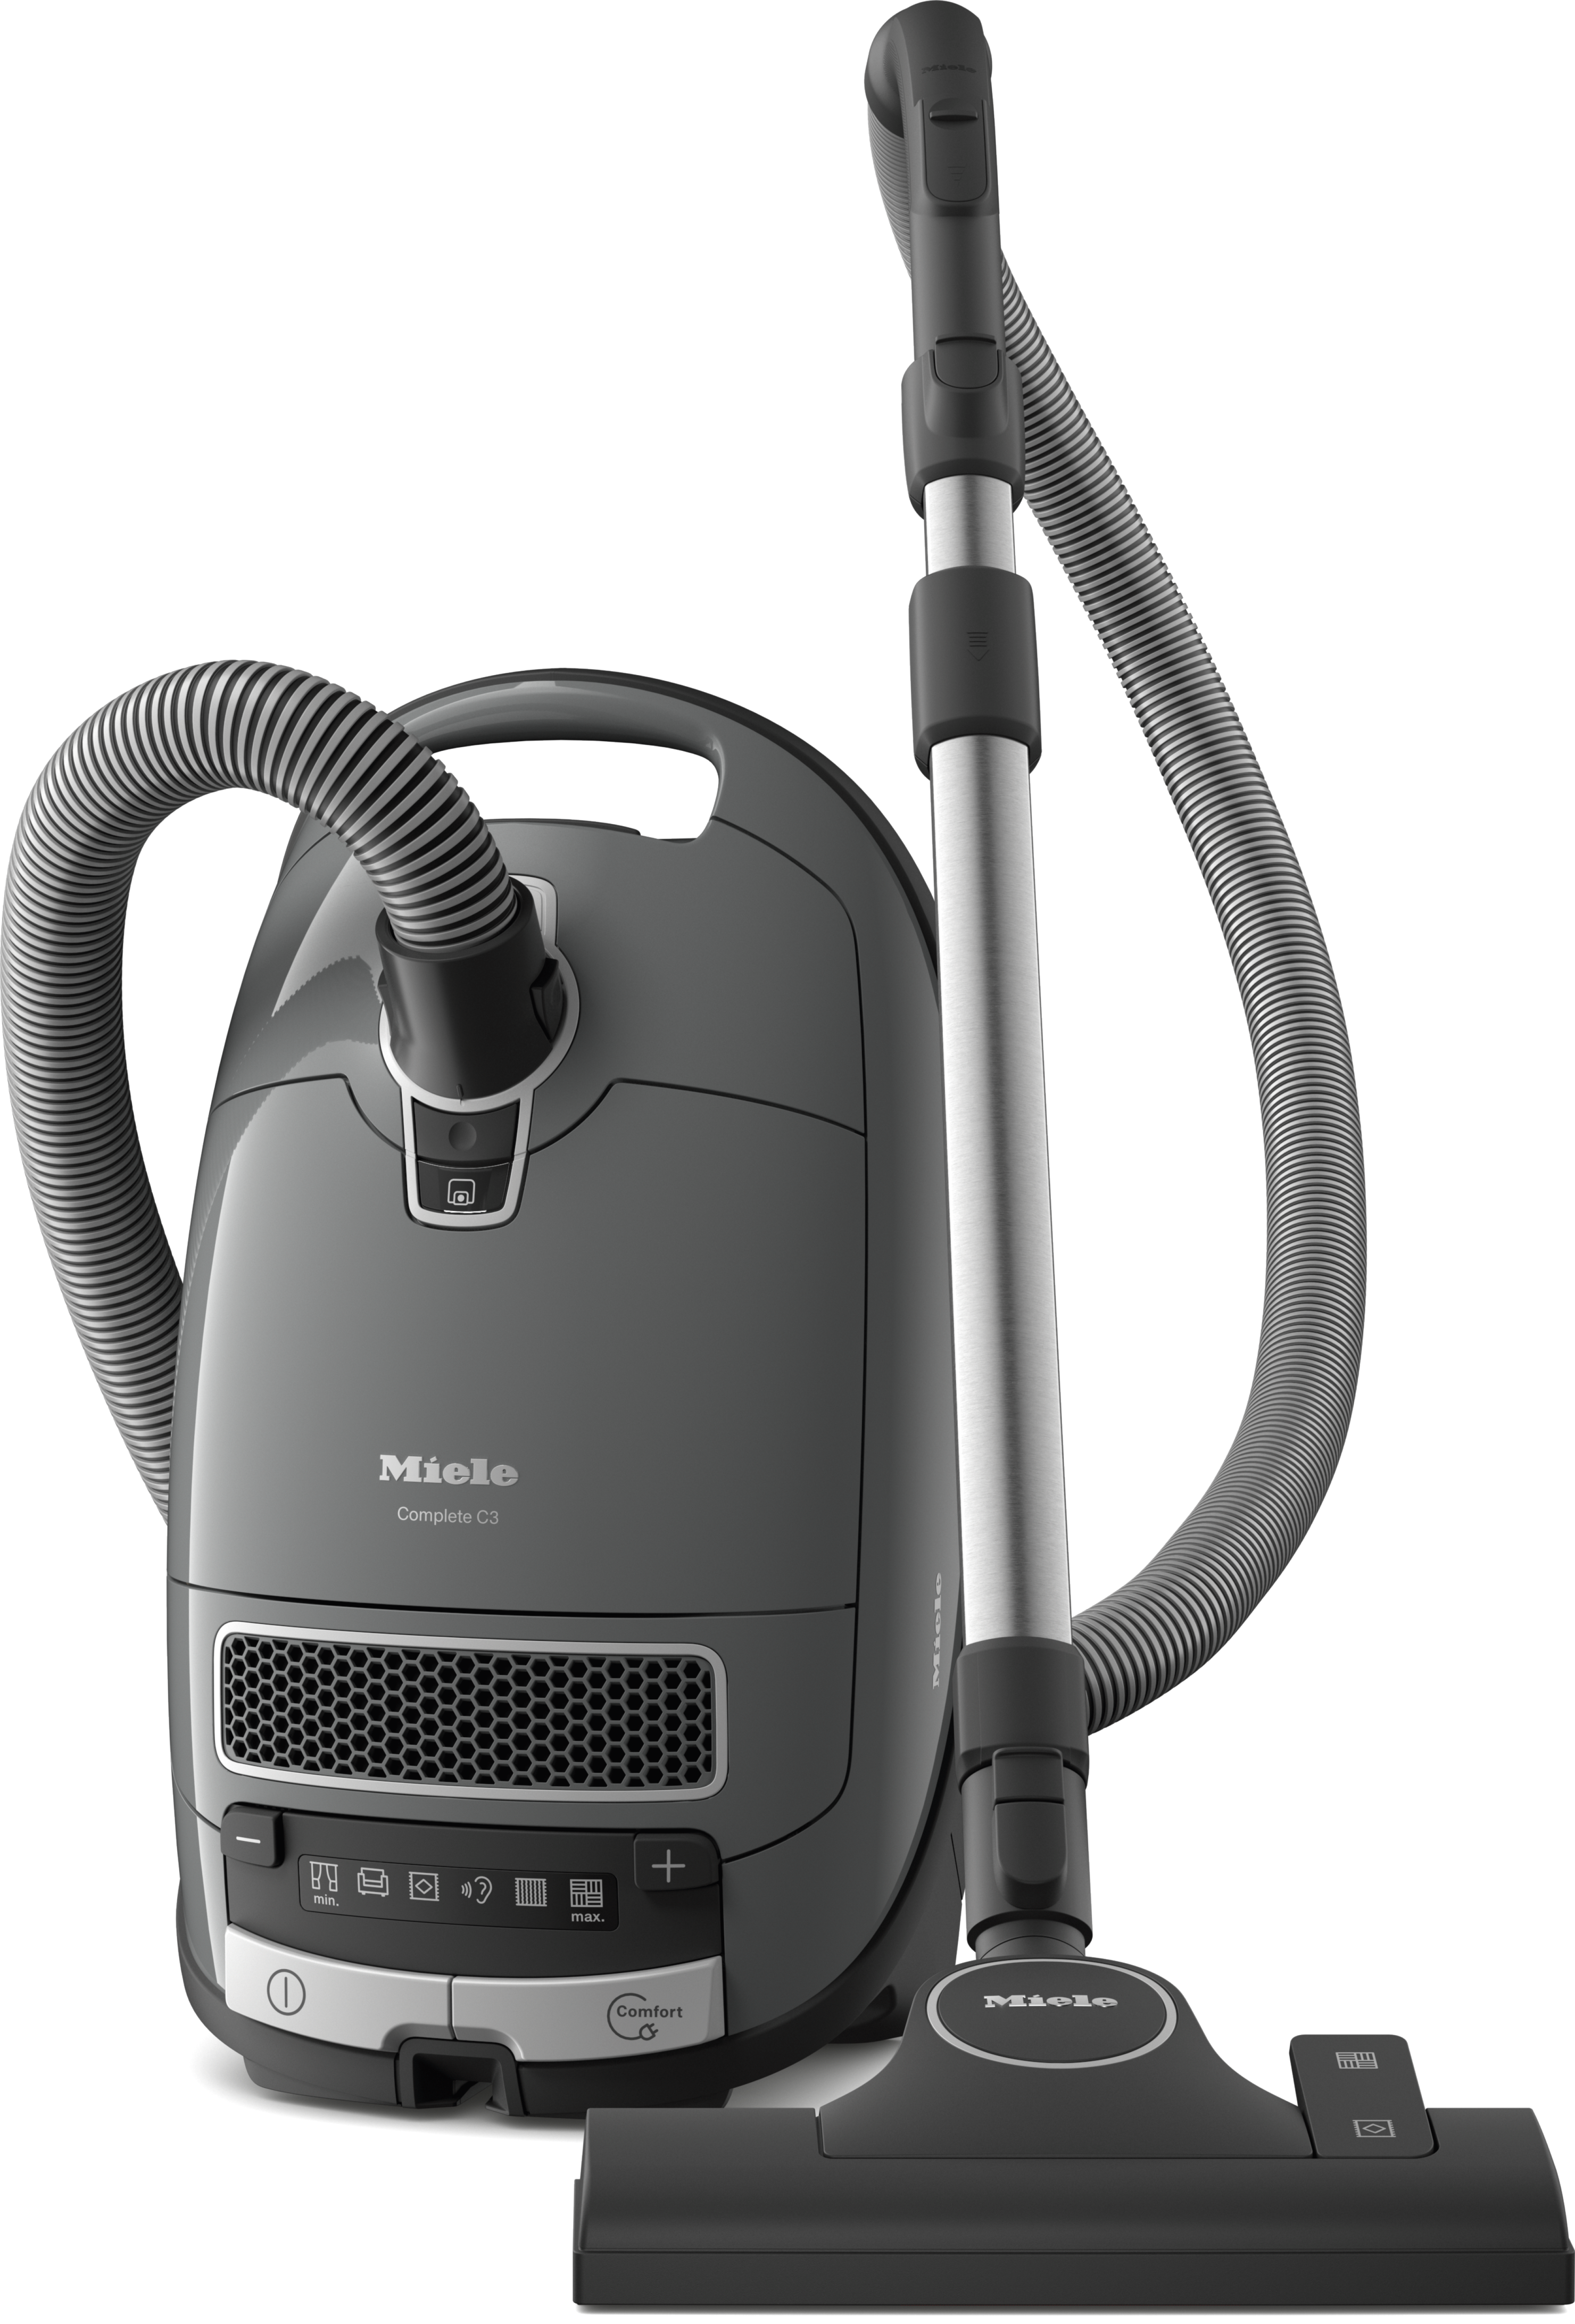 Complete C3Cylinder vacuum cleaner With maximum suction power and foot controls for thorough, convenient vacuuming.